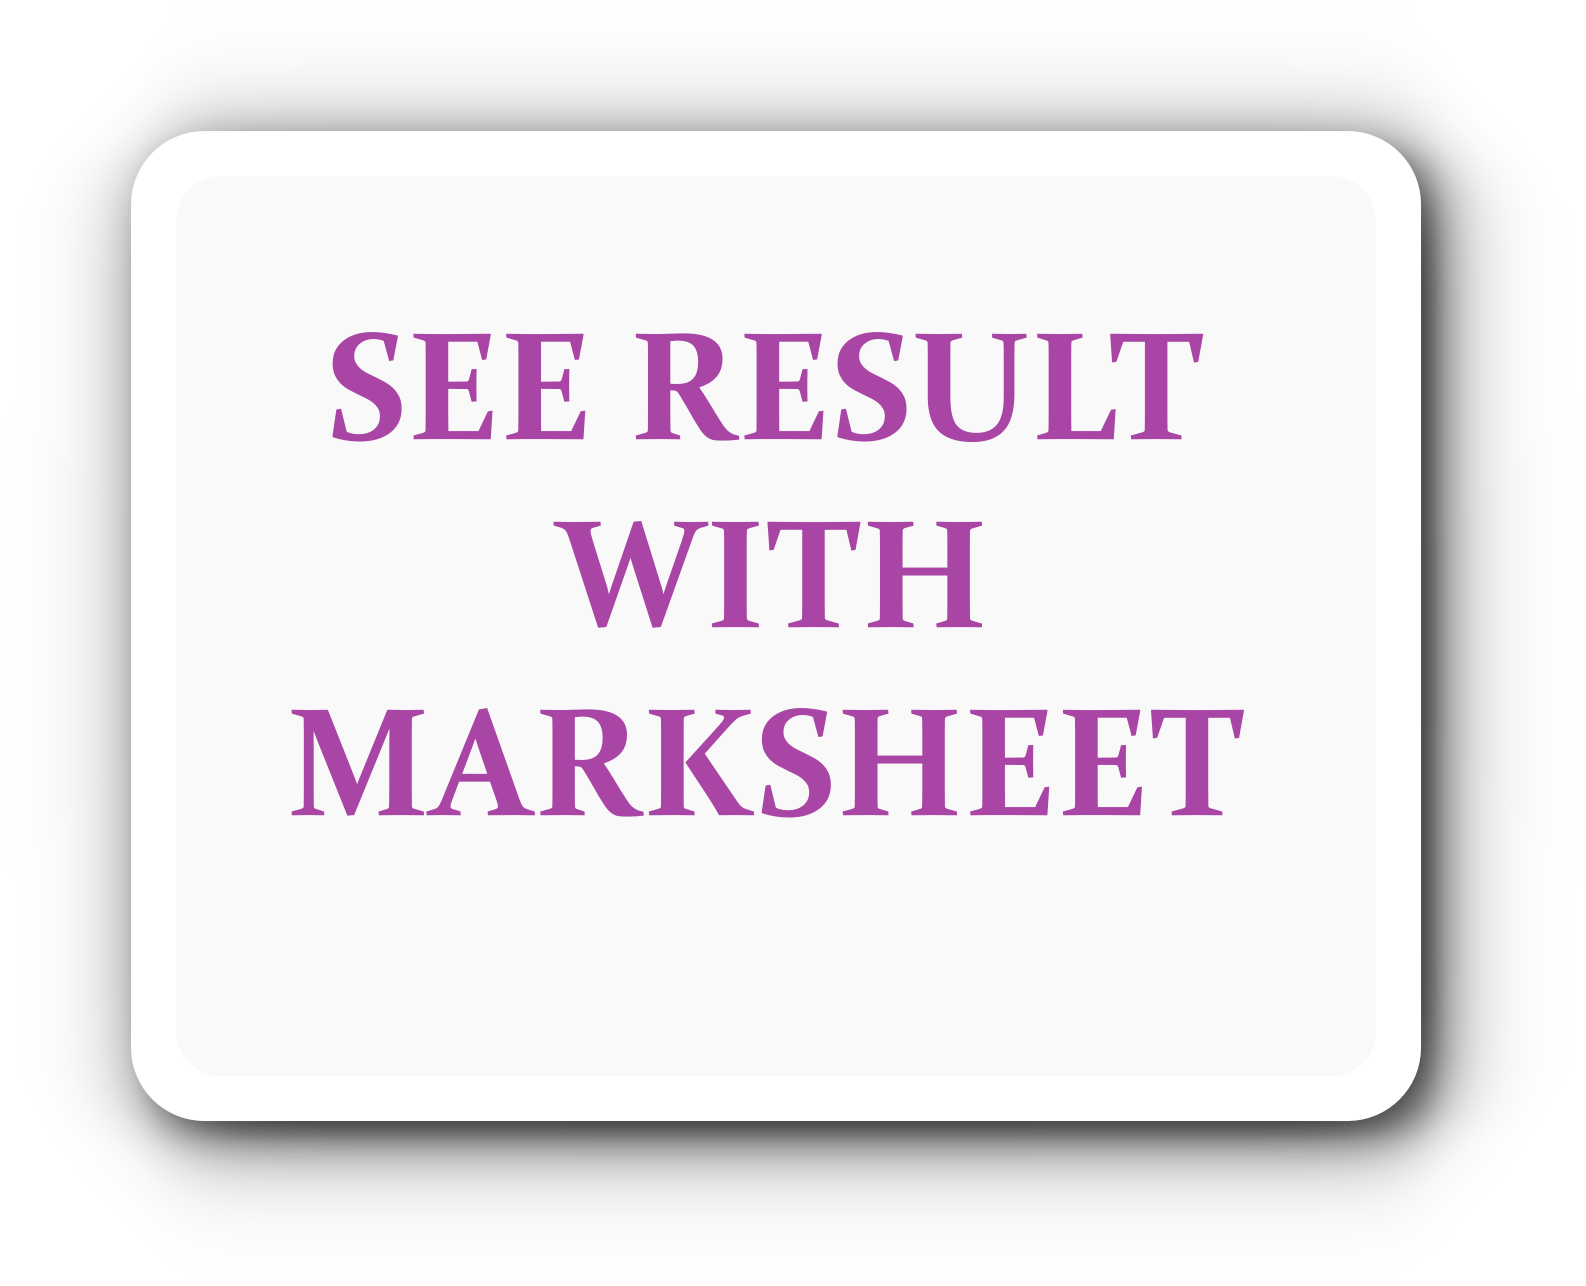 SEE RESULT With Marksheet